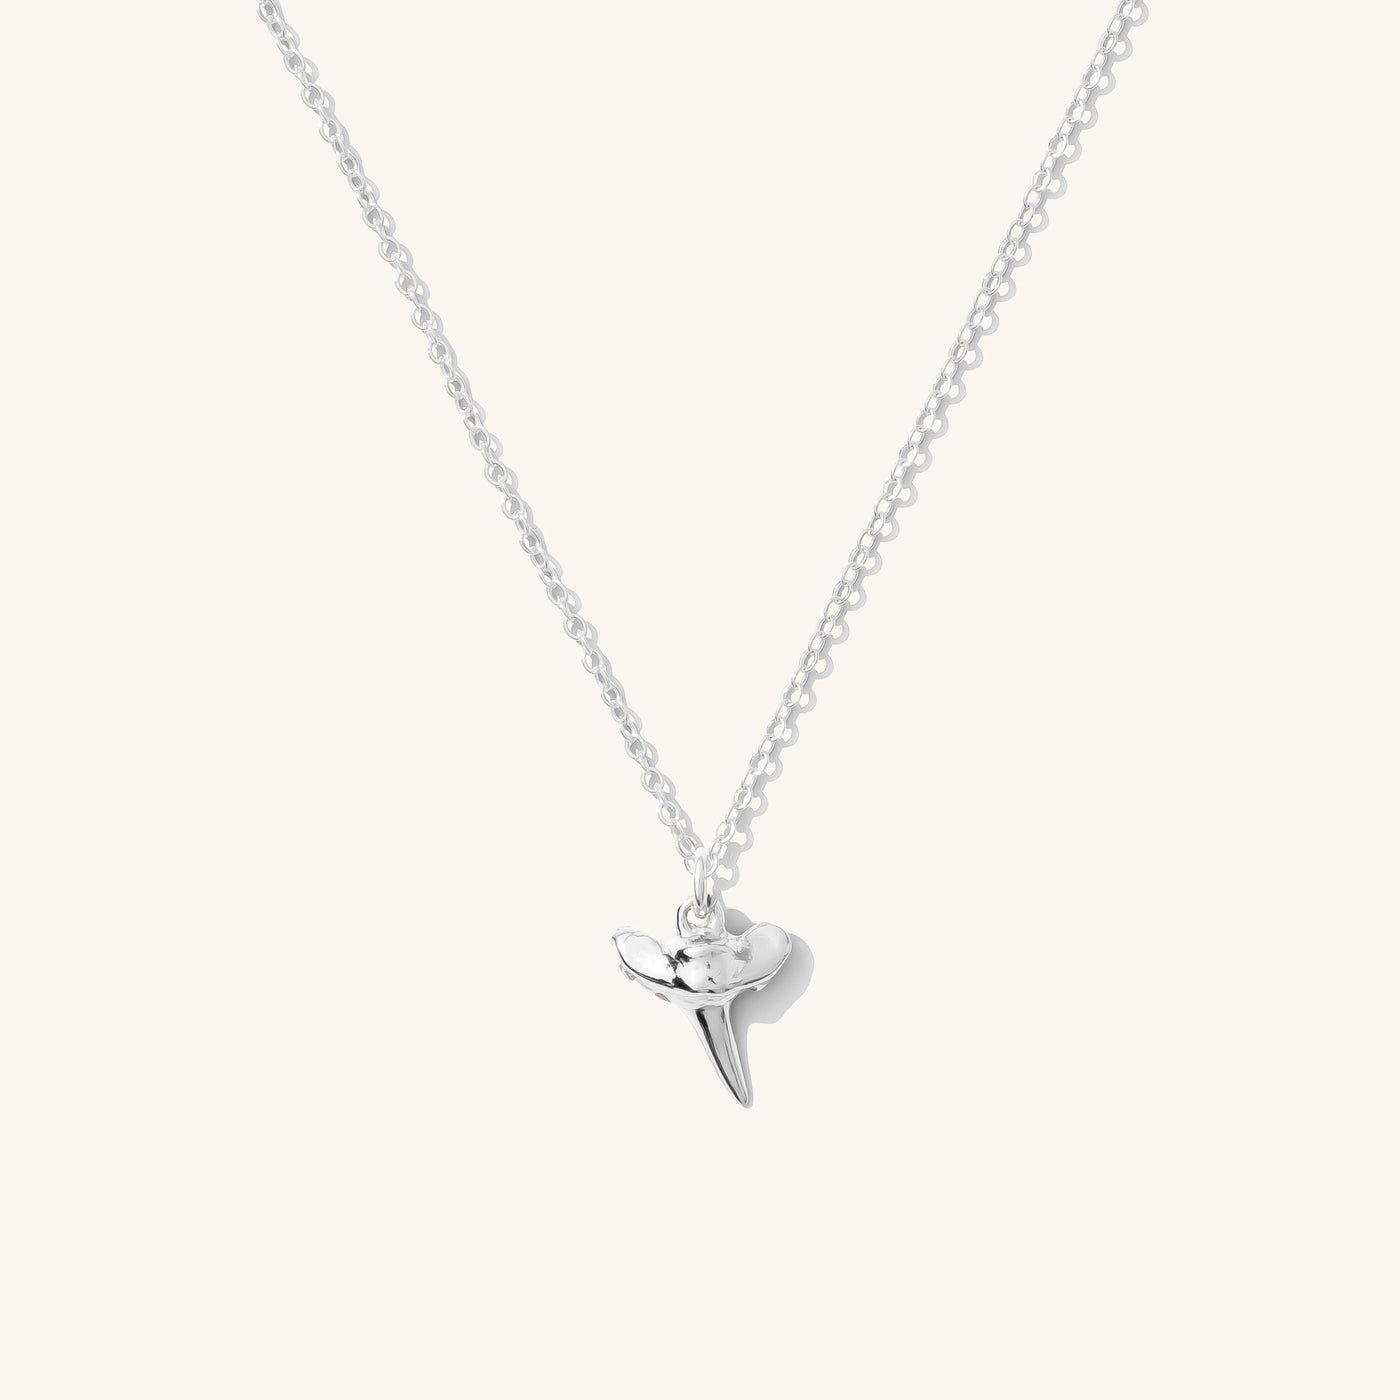 Tiny Shark Tooth Necklace | Simple & Dainty Jewelry